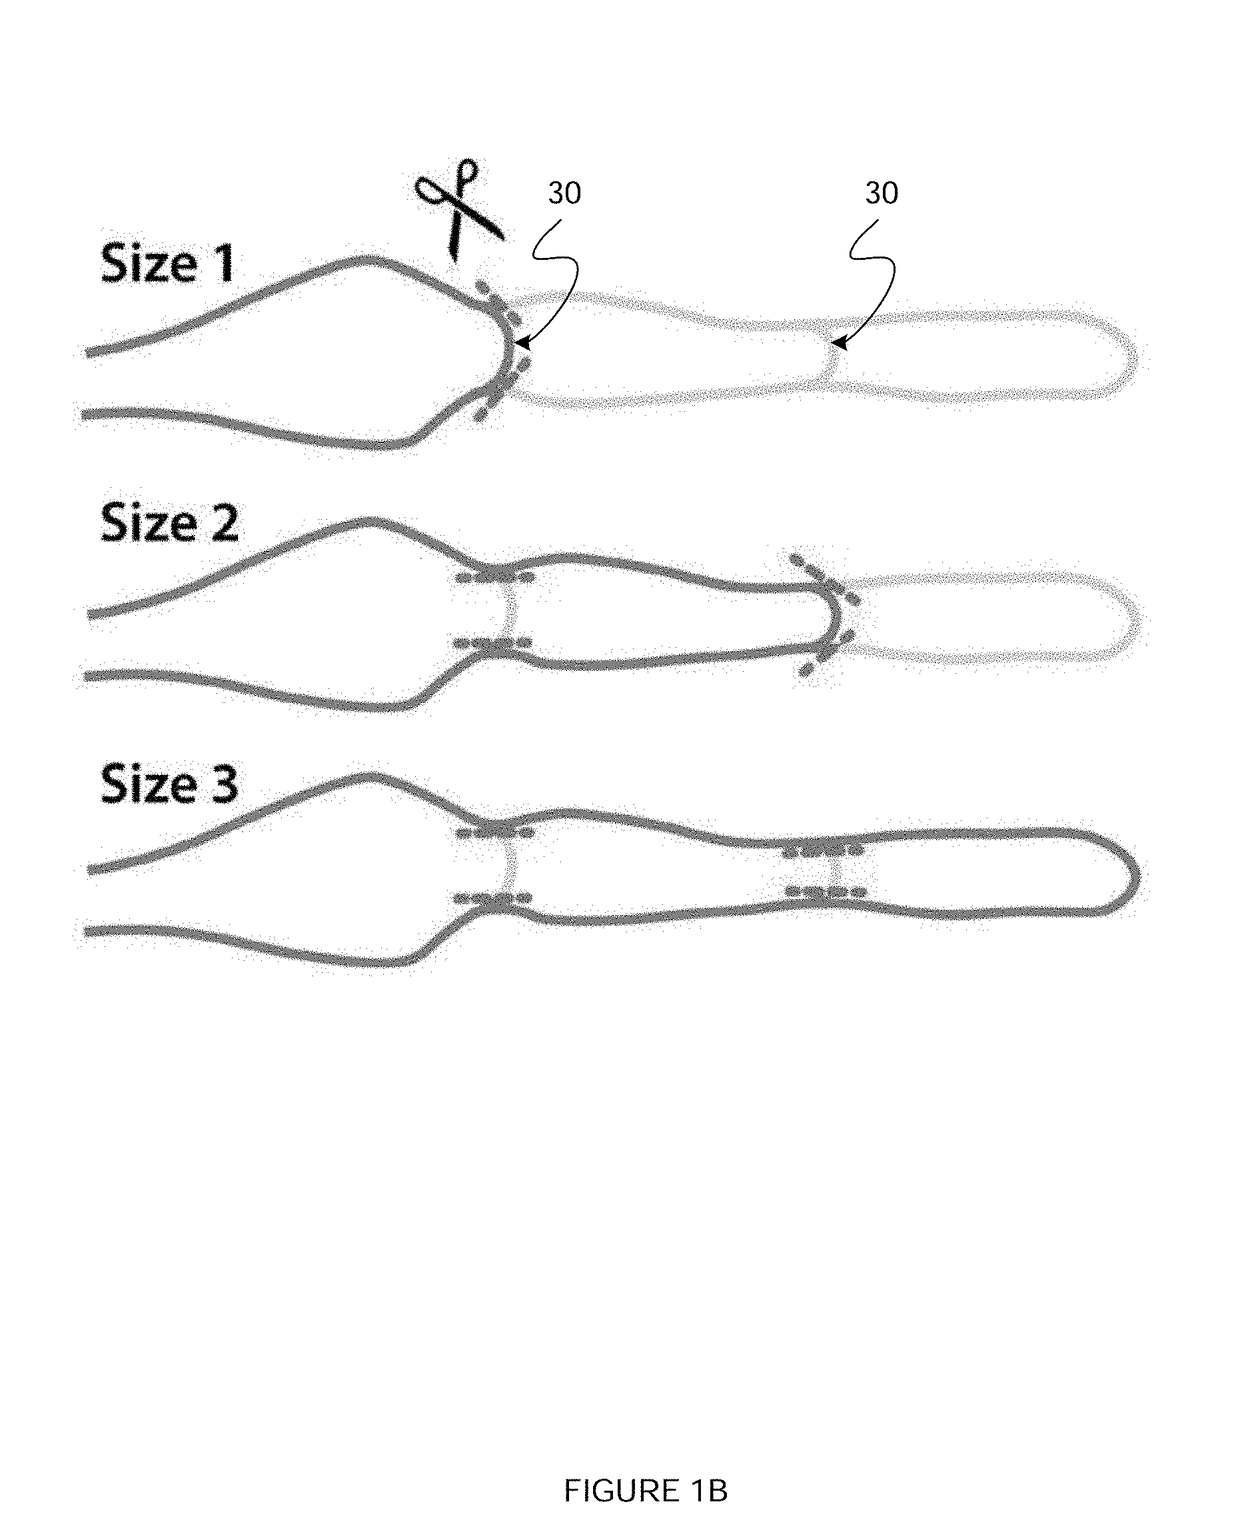 A device for enhancing and/or maintaining a penile erection